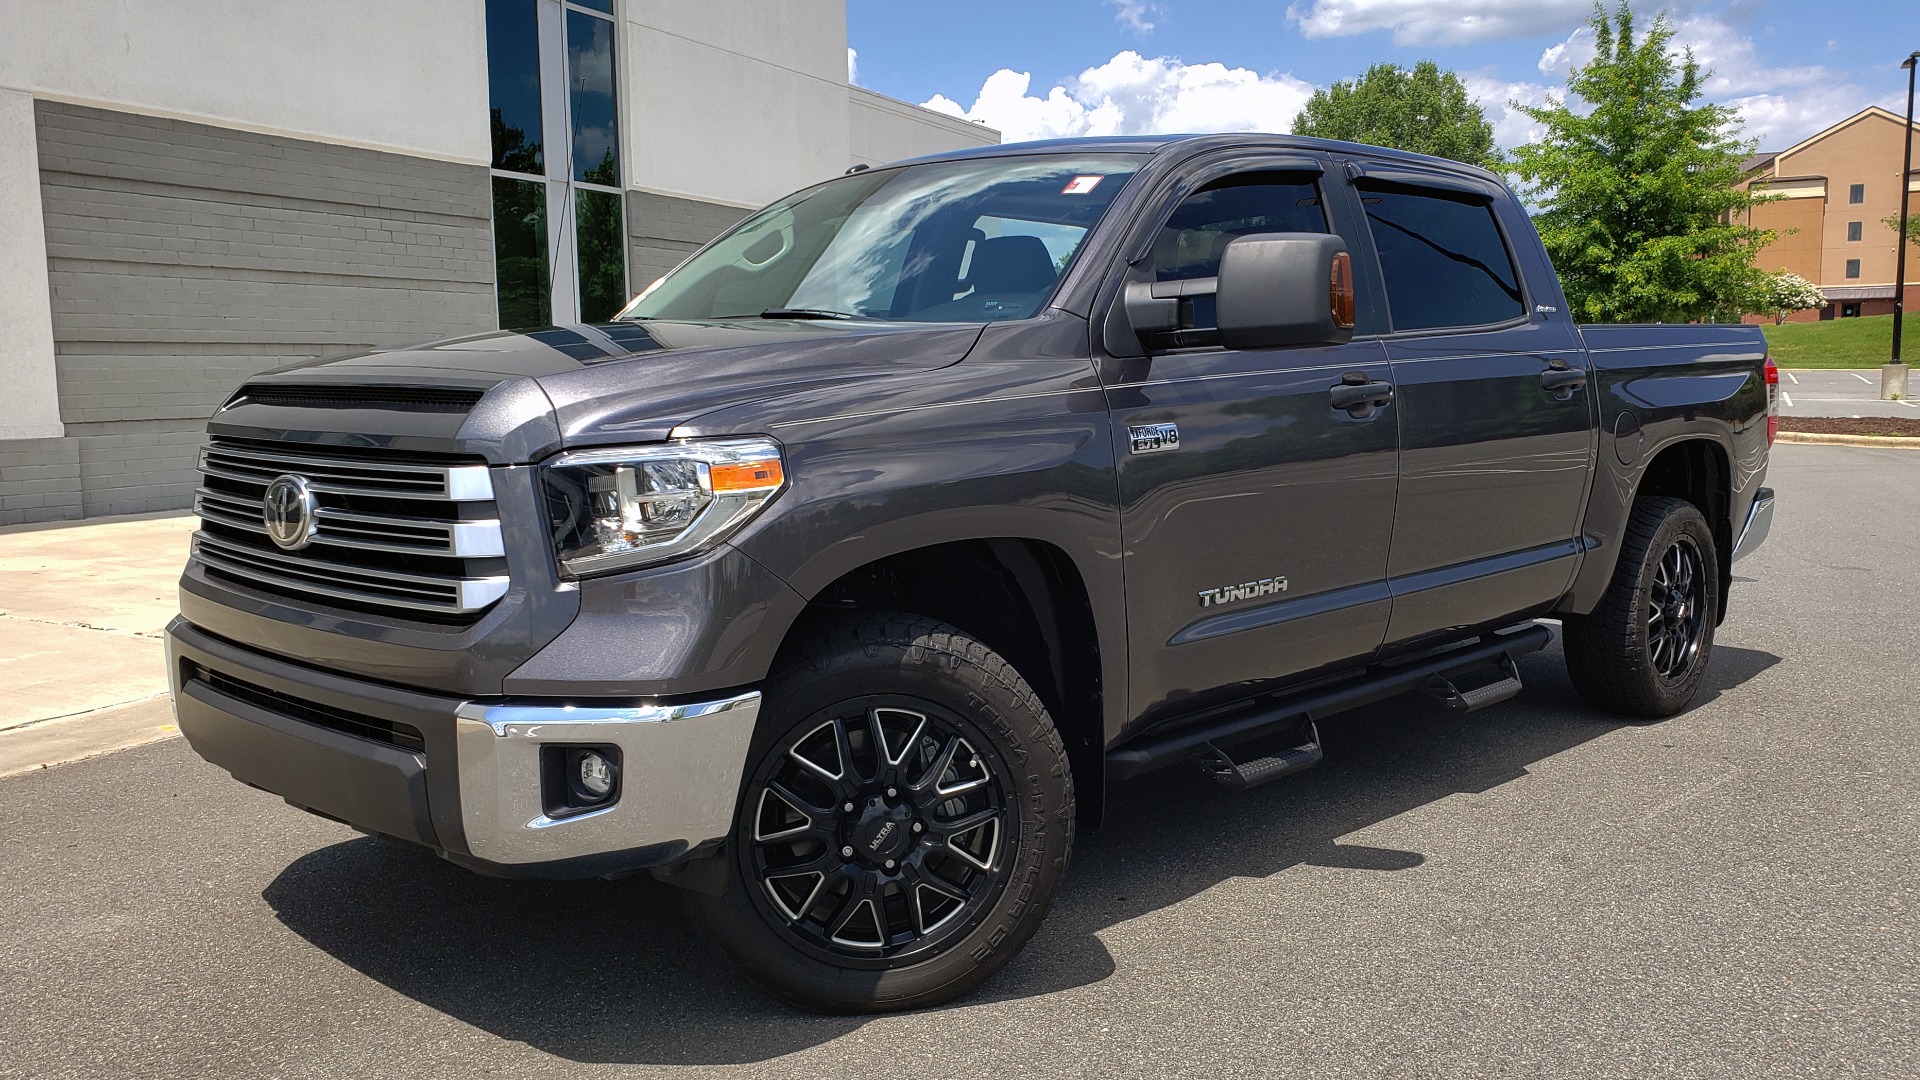 Used 2019 Toyota TUNDRA 4WD LIMITED / 5.7L V8 / 6-SPD AUTO / NAV / SUNROOF / REARVIEW for sale Sold at Formula Imports in Charlotte NC 28227 1